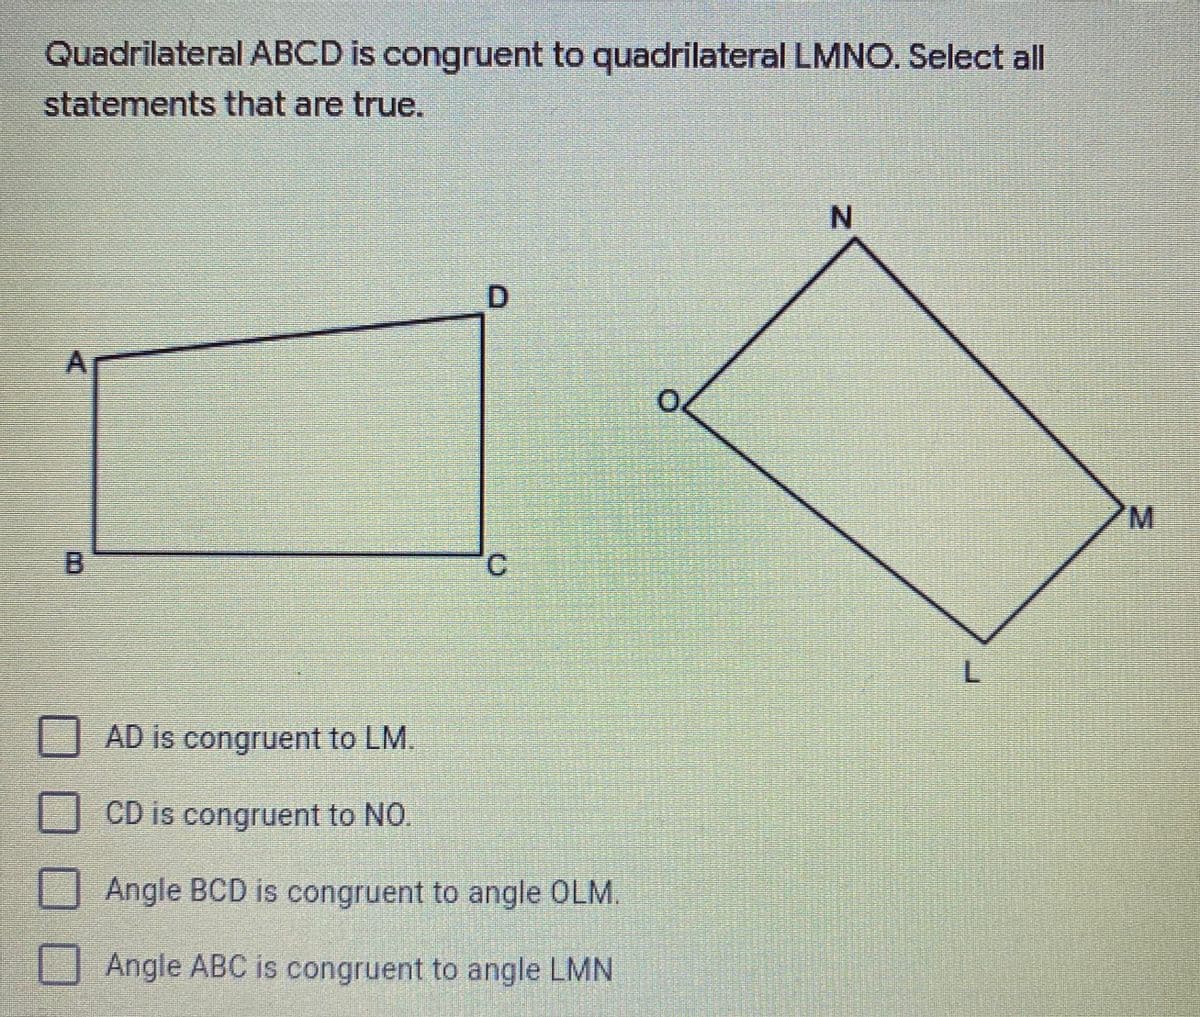 Quadrilateral ABCD is congruent to quadrilateral LMNO. Select all
statements that are true.
N.
D.
B.
O AD is congruent to LM.
D CD is congruent to NO.
U Angle BCD is congruent to angle OLM.
Angle ABC is congruent to angle LMN
